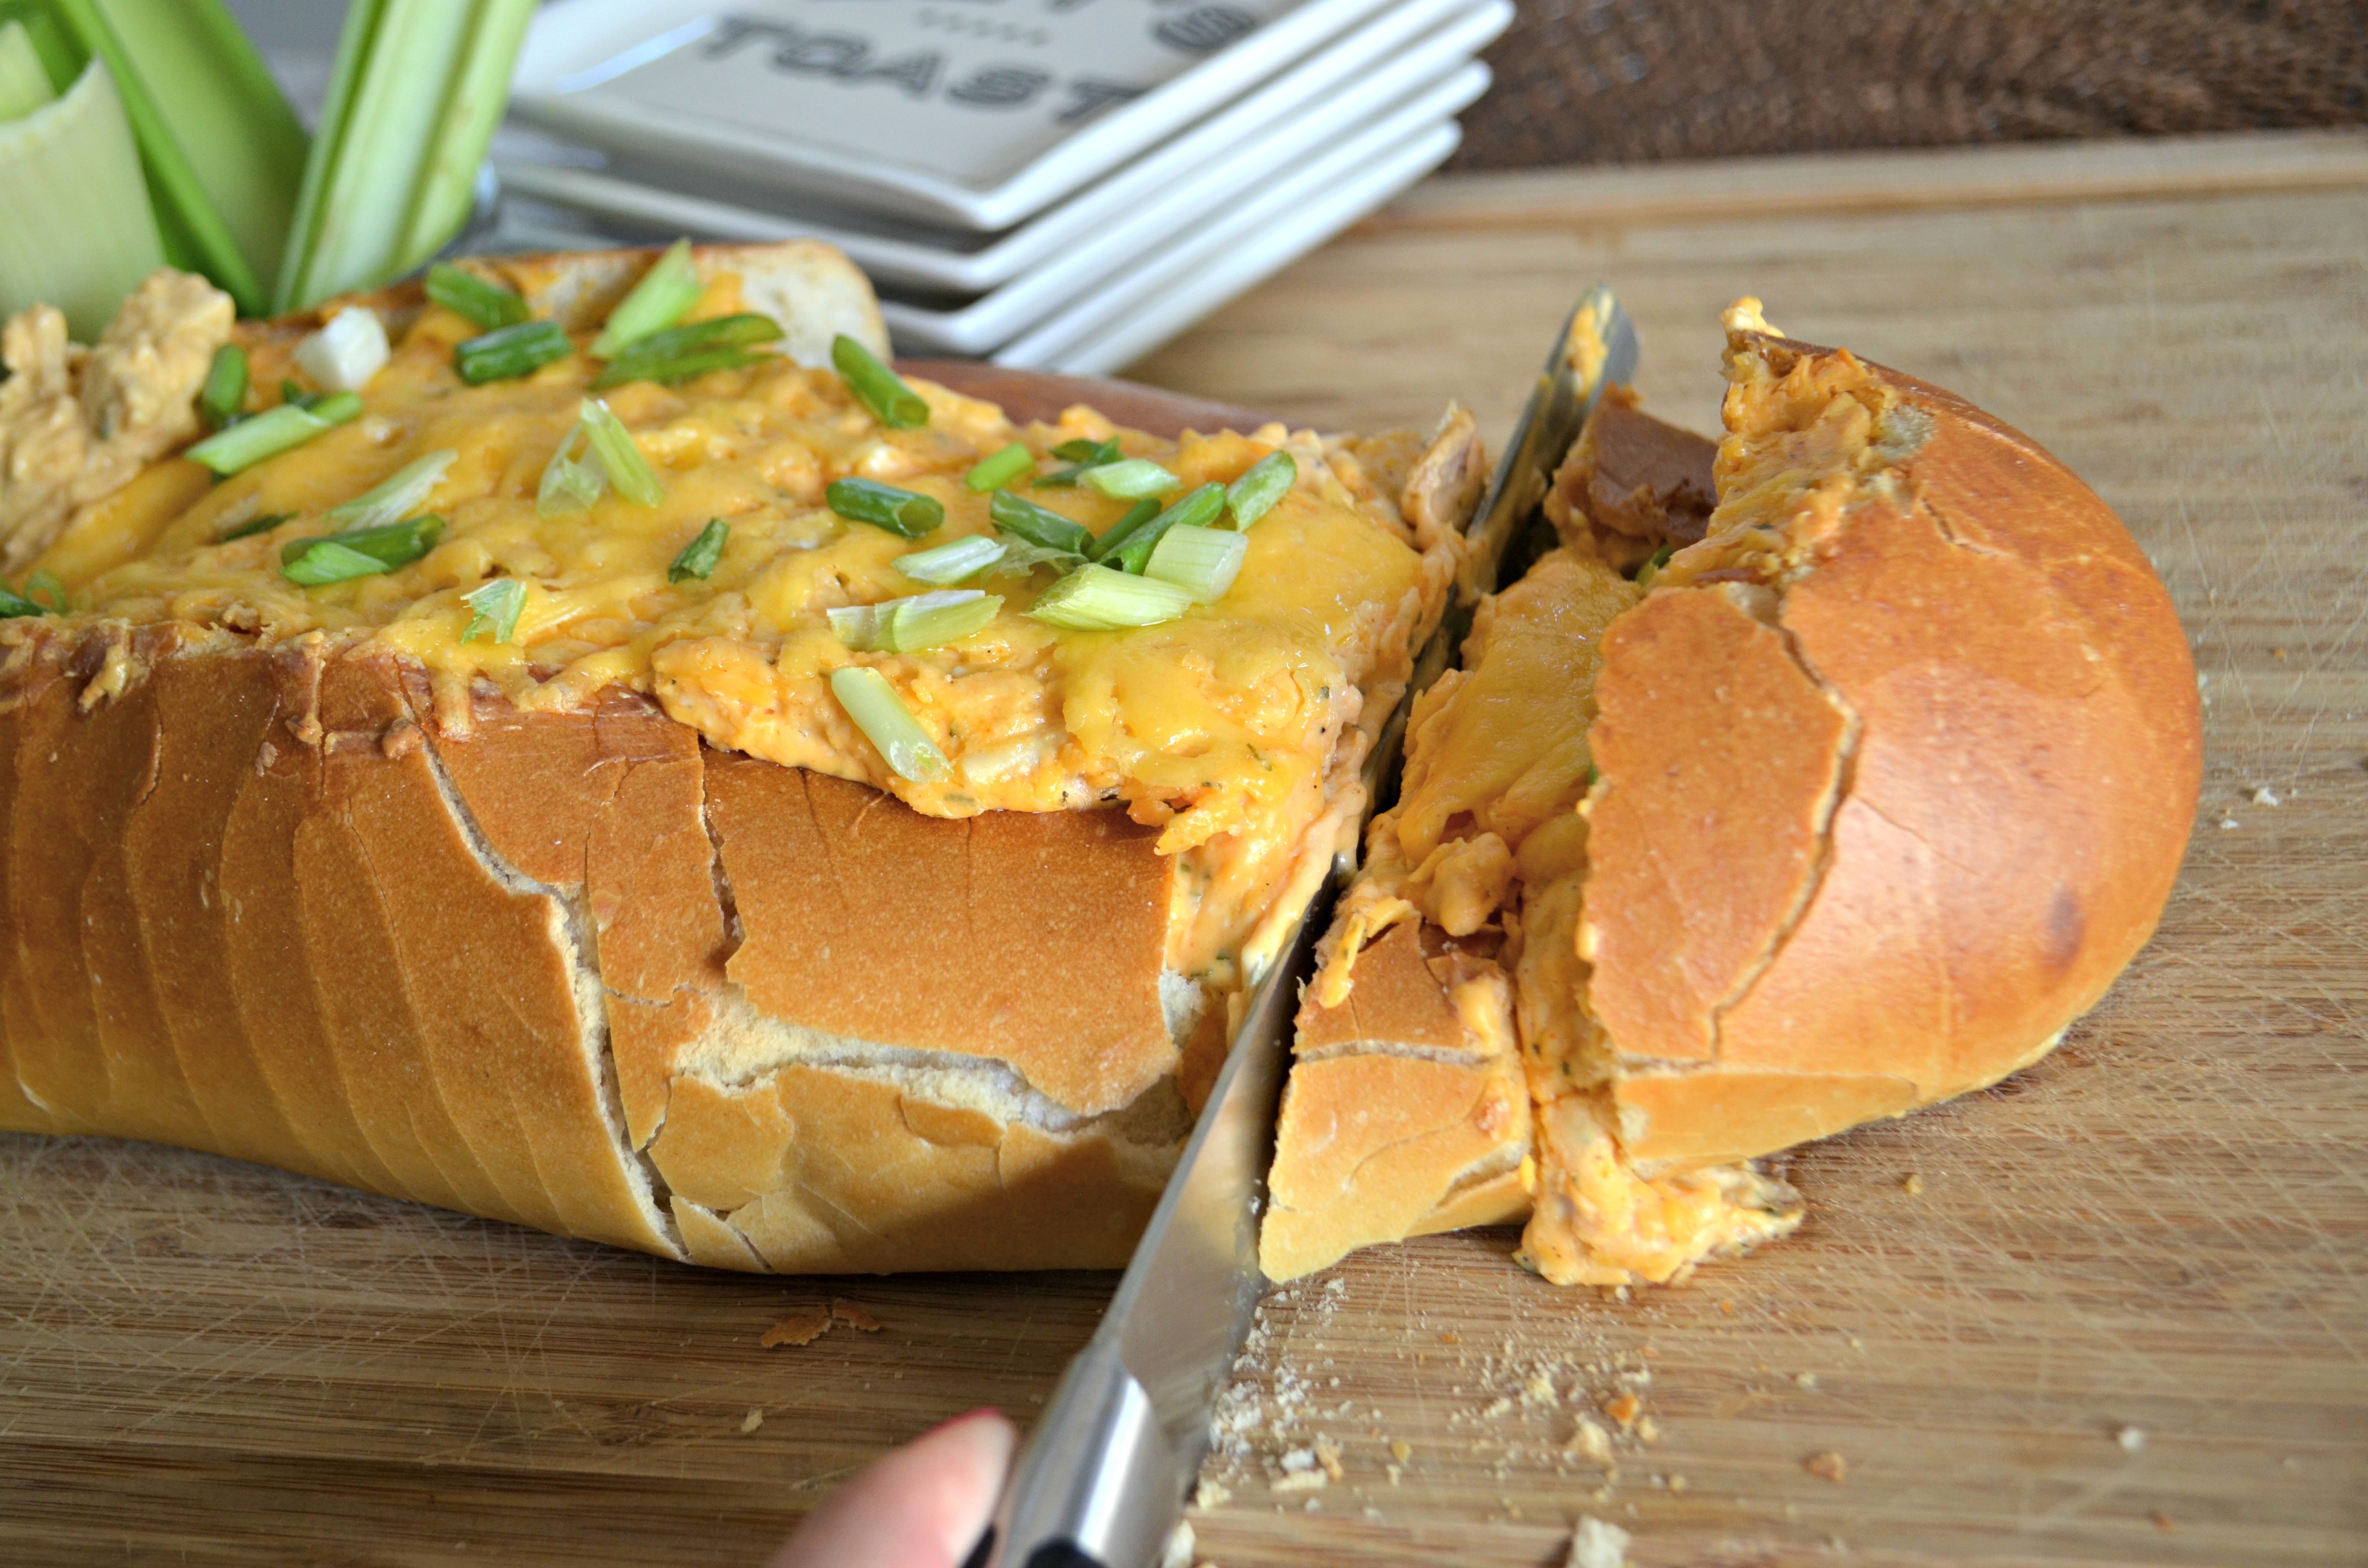 Buffalo Chicken Dip Bread Bowl - slicing as a loaf, which didn't work well